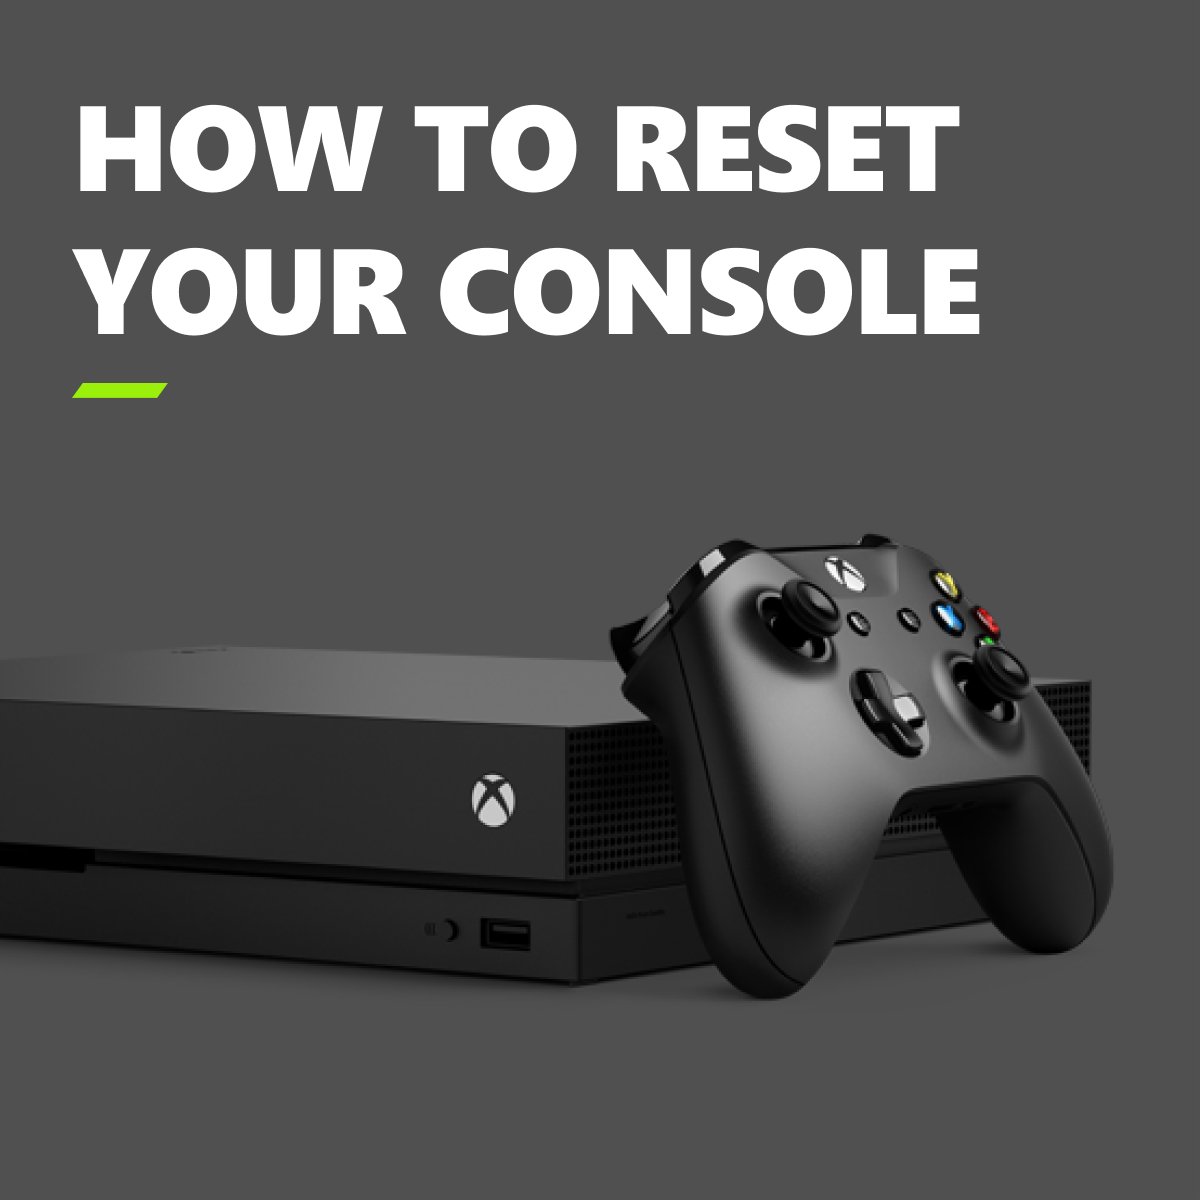 Press the Xbox button on the controller to open the guide
Select System &gt; Settings &gt; System &gt; Updates &gt; Update console